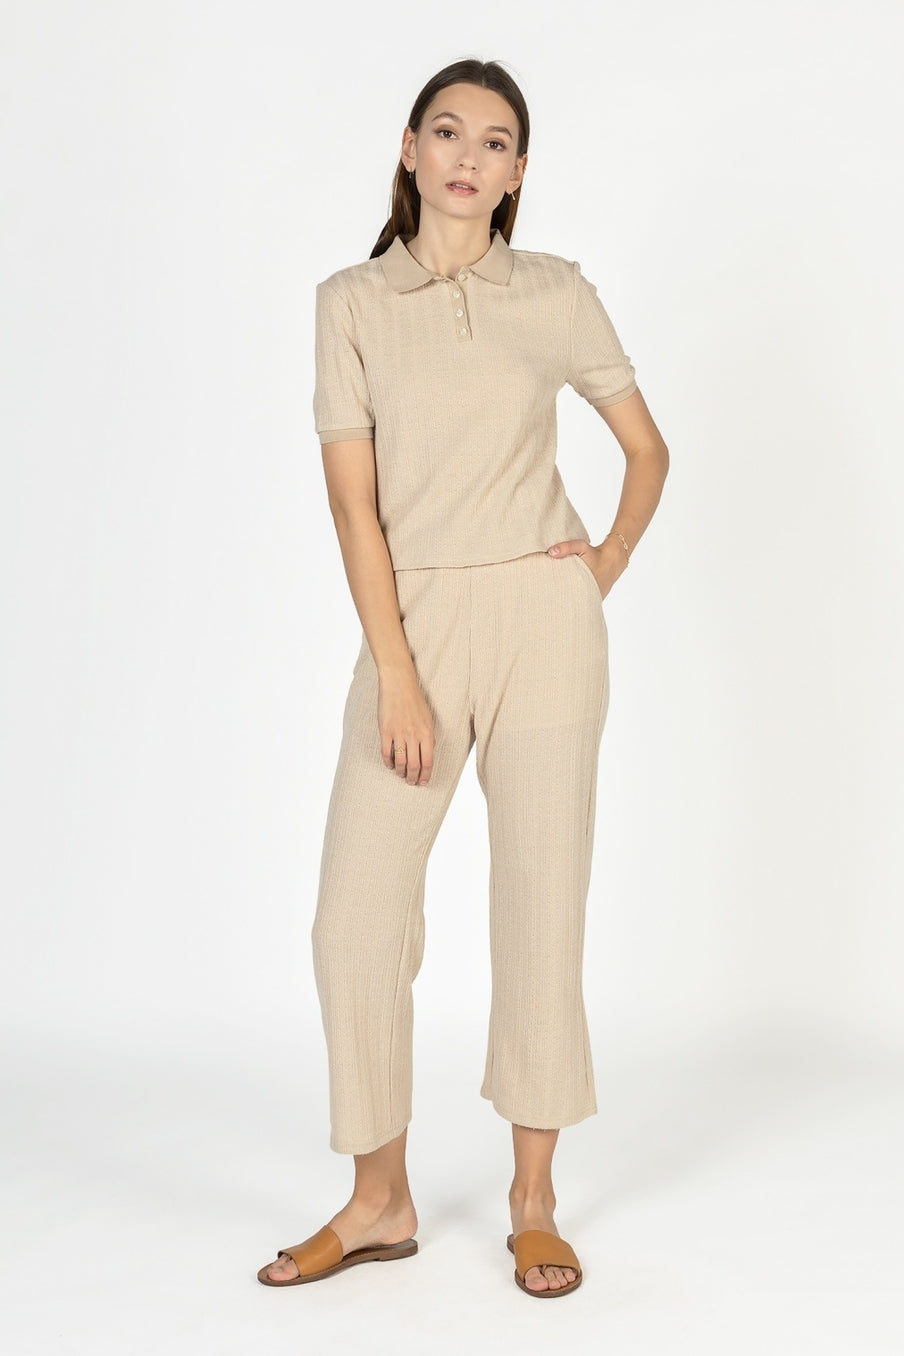 Textured knit pant in taupe from Mod Ref  at Tru Blue Boutique